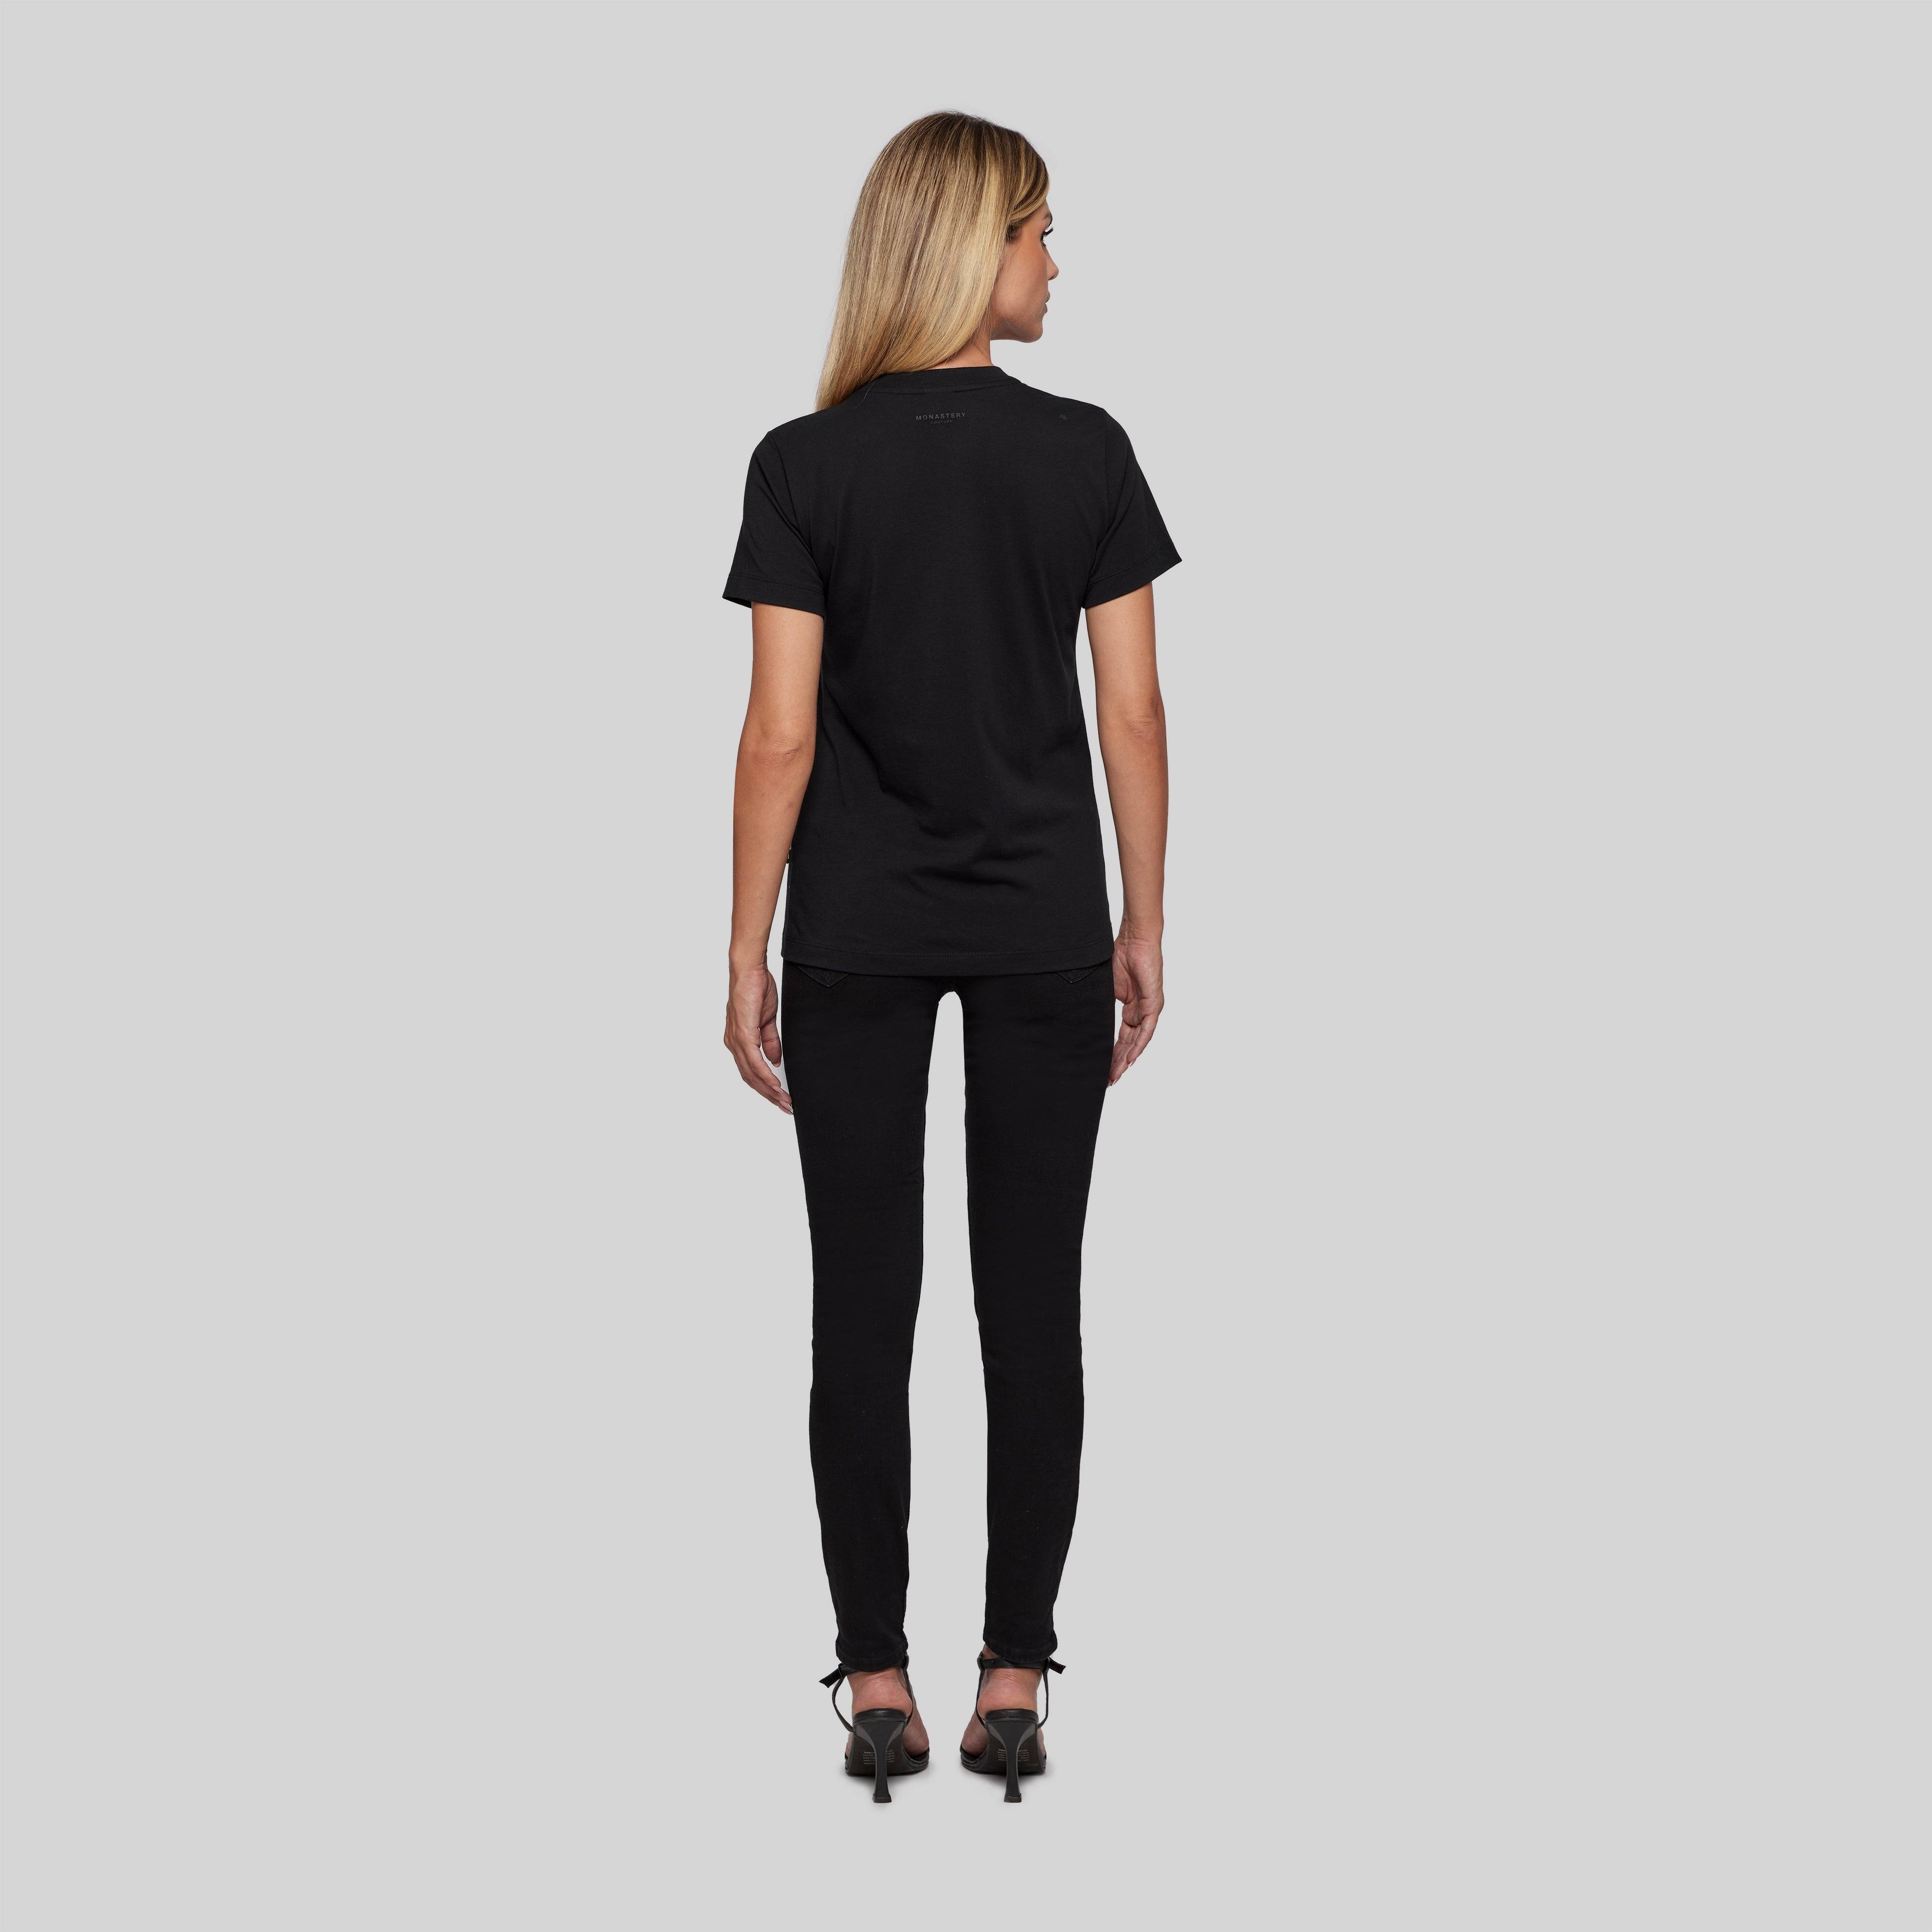 ELANY BLACK T-SHIRT | Monastery Couture